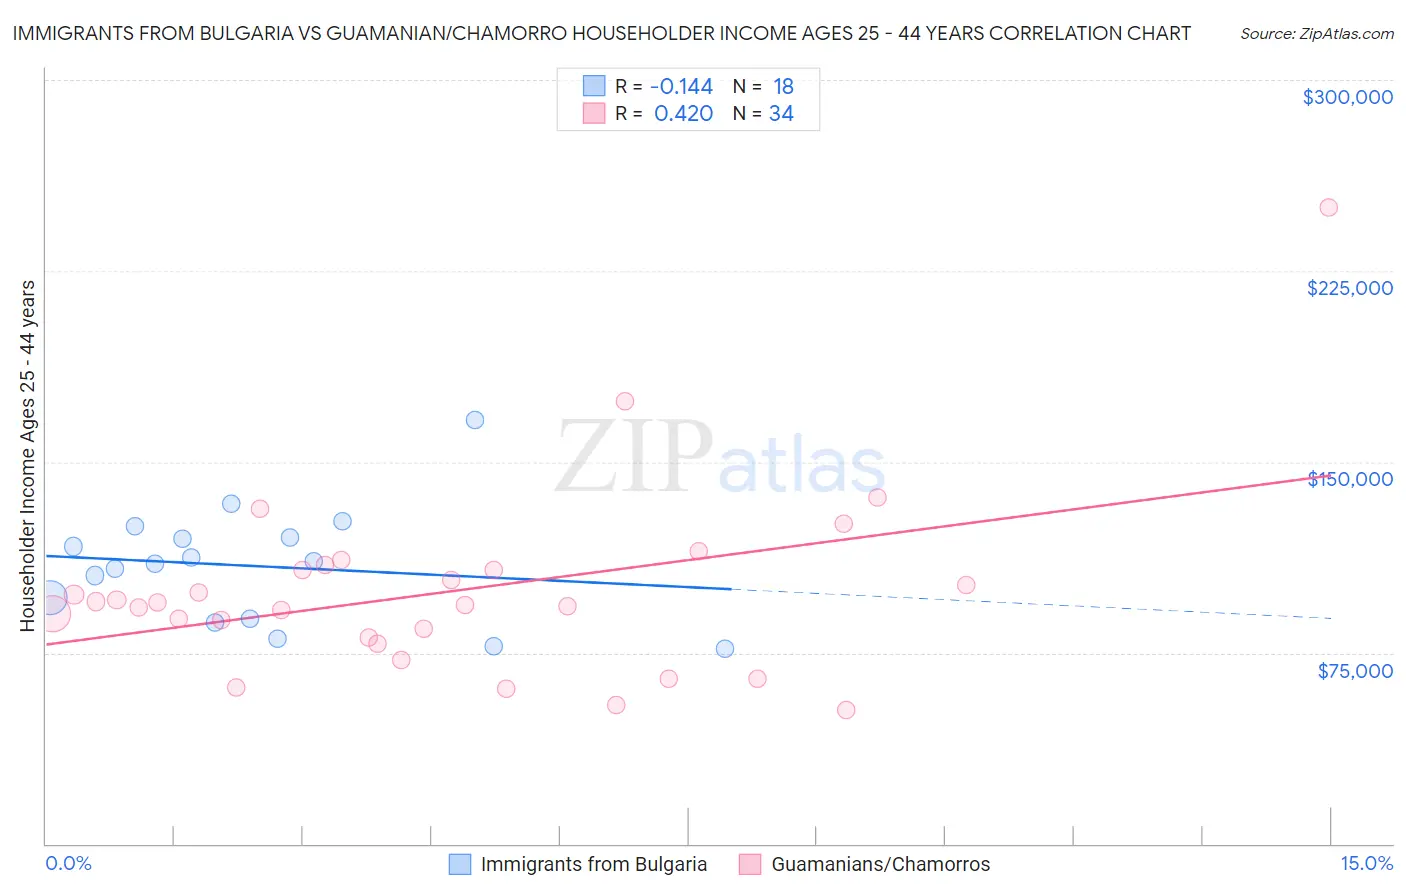 Immigrants from Bulgaria vs Guamanian/Chamorro Householder Income Ages 25 - 44 years